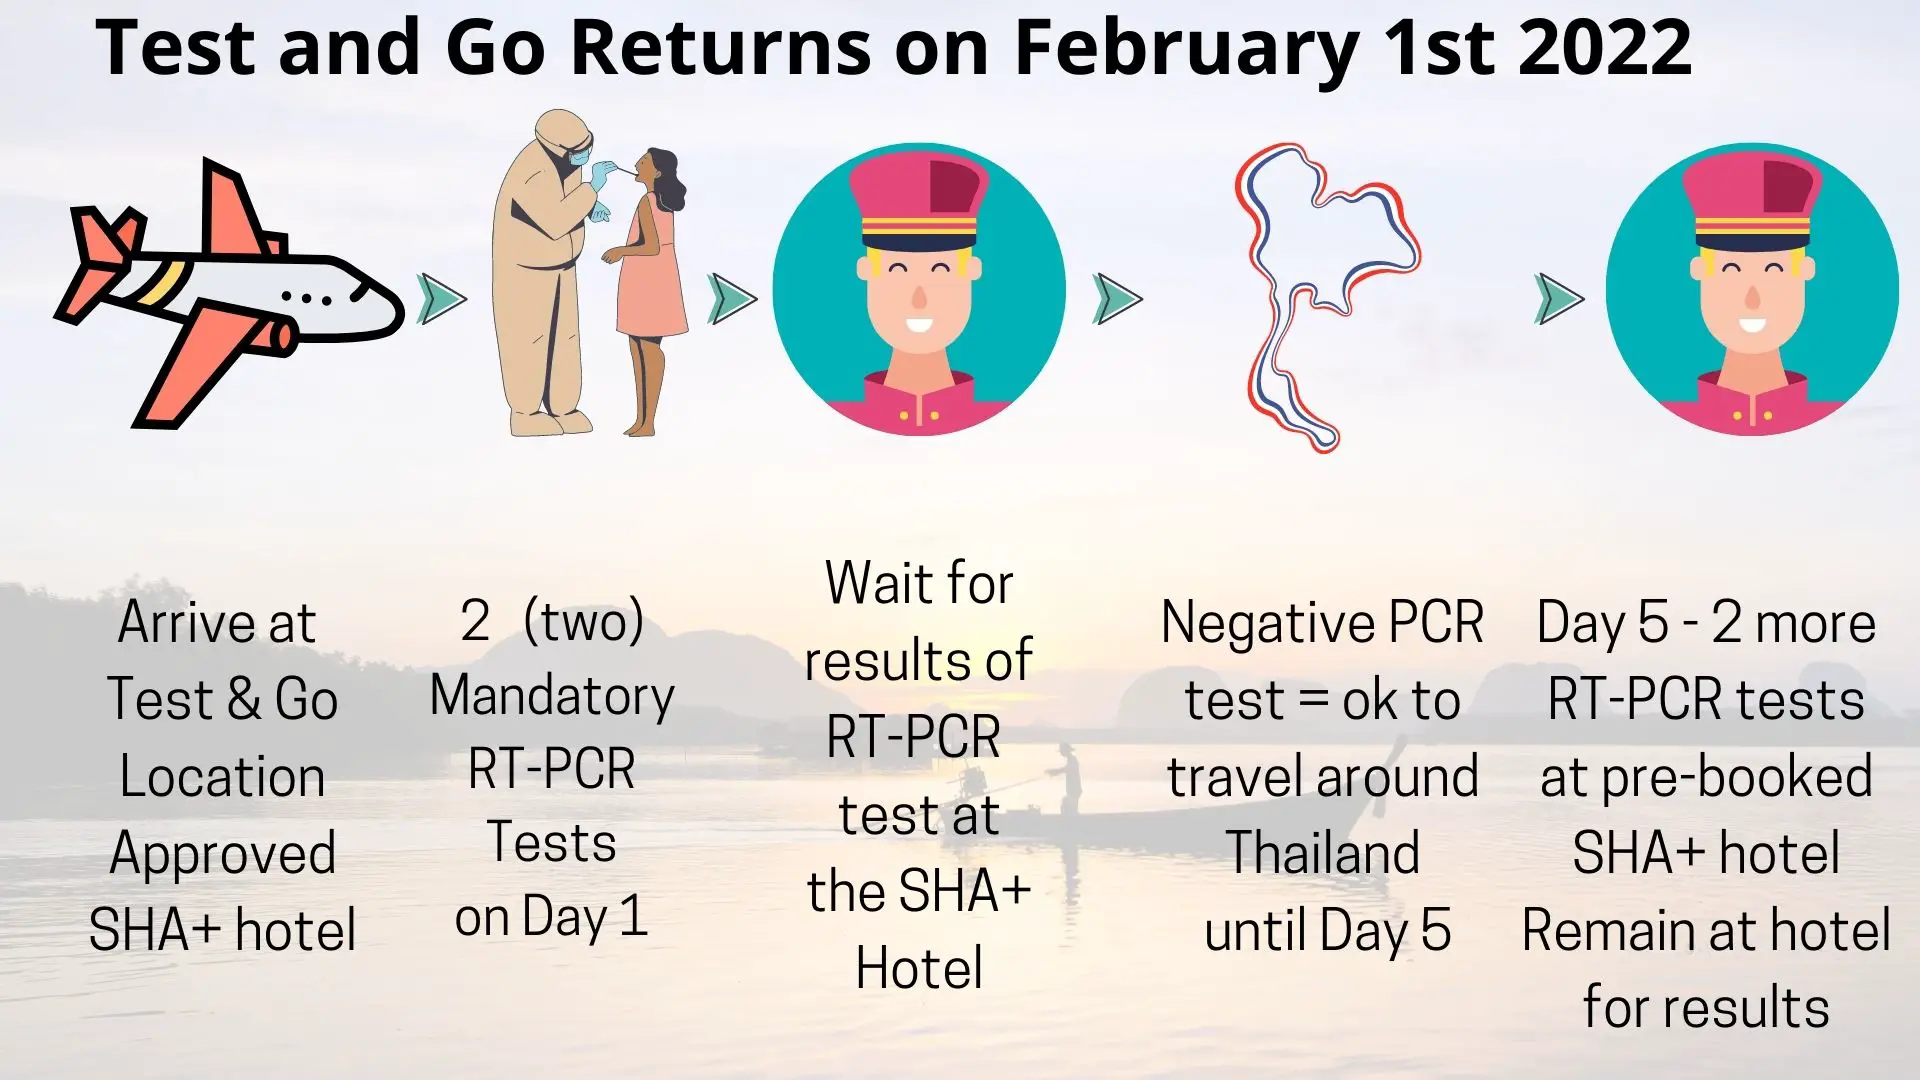 Test and Go Returns on February 1st 2022